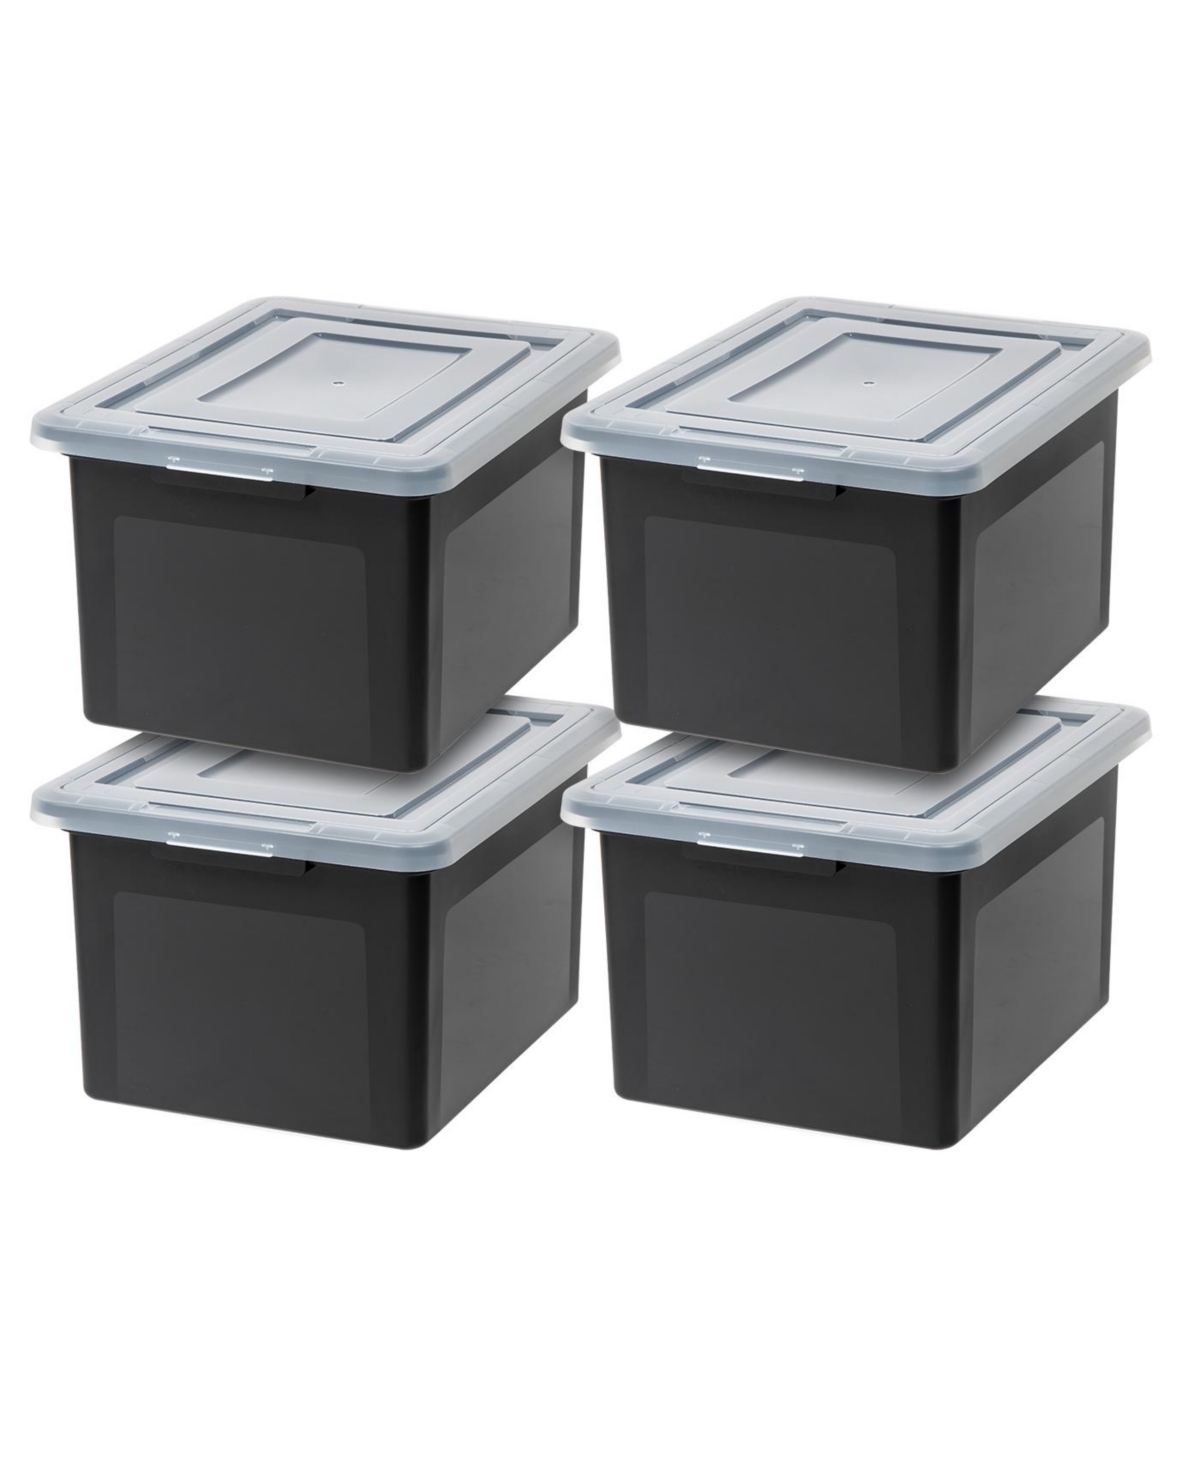 Letter & Legal Size Plastic Storage Bin Tote Organizing File Box with Durable and Secure Latching Lid, Stackable and Nestable, 4 Pack, Black - Black